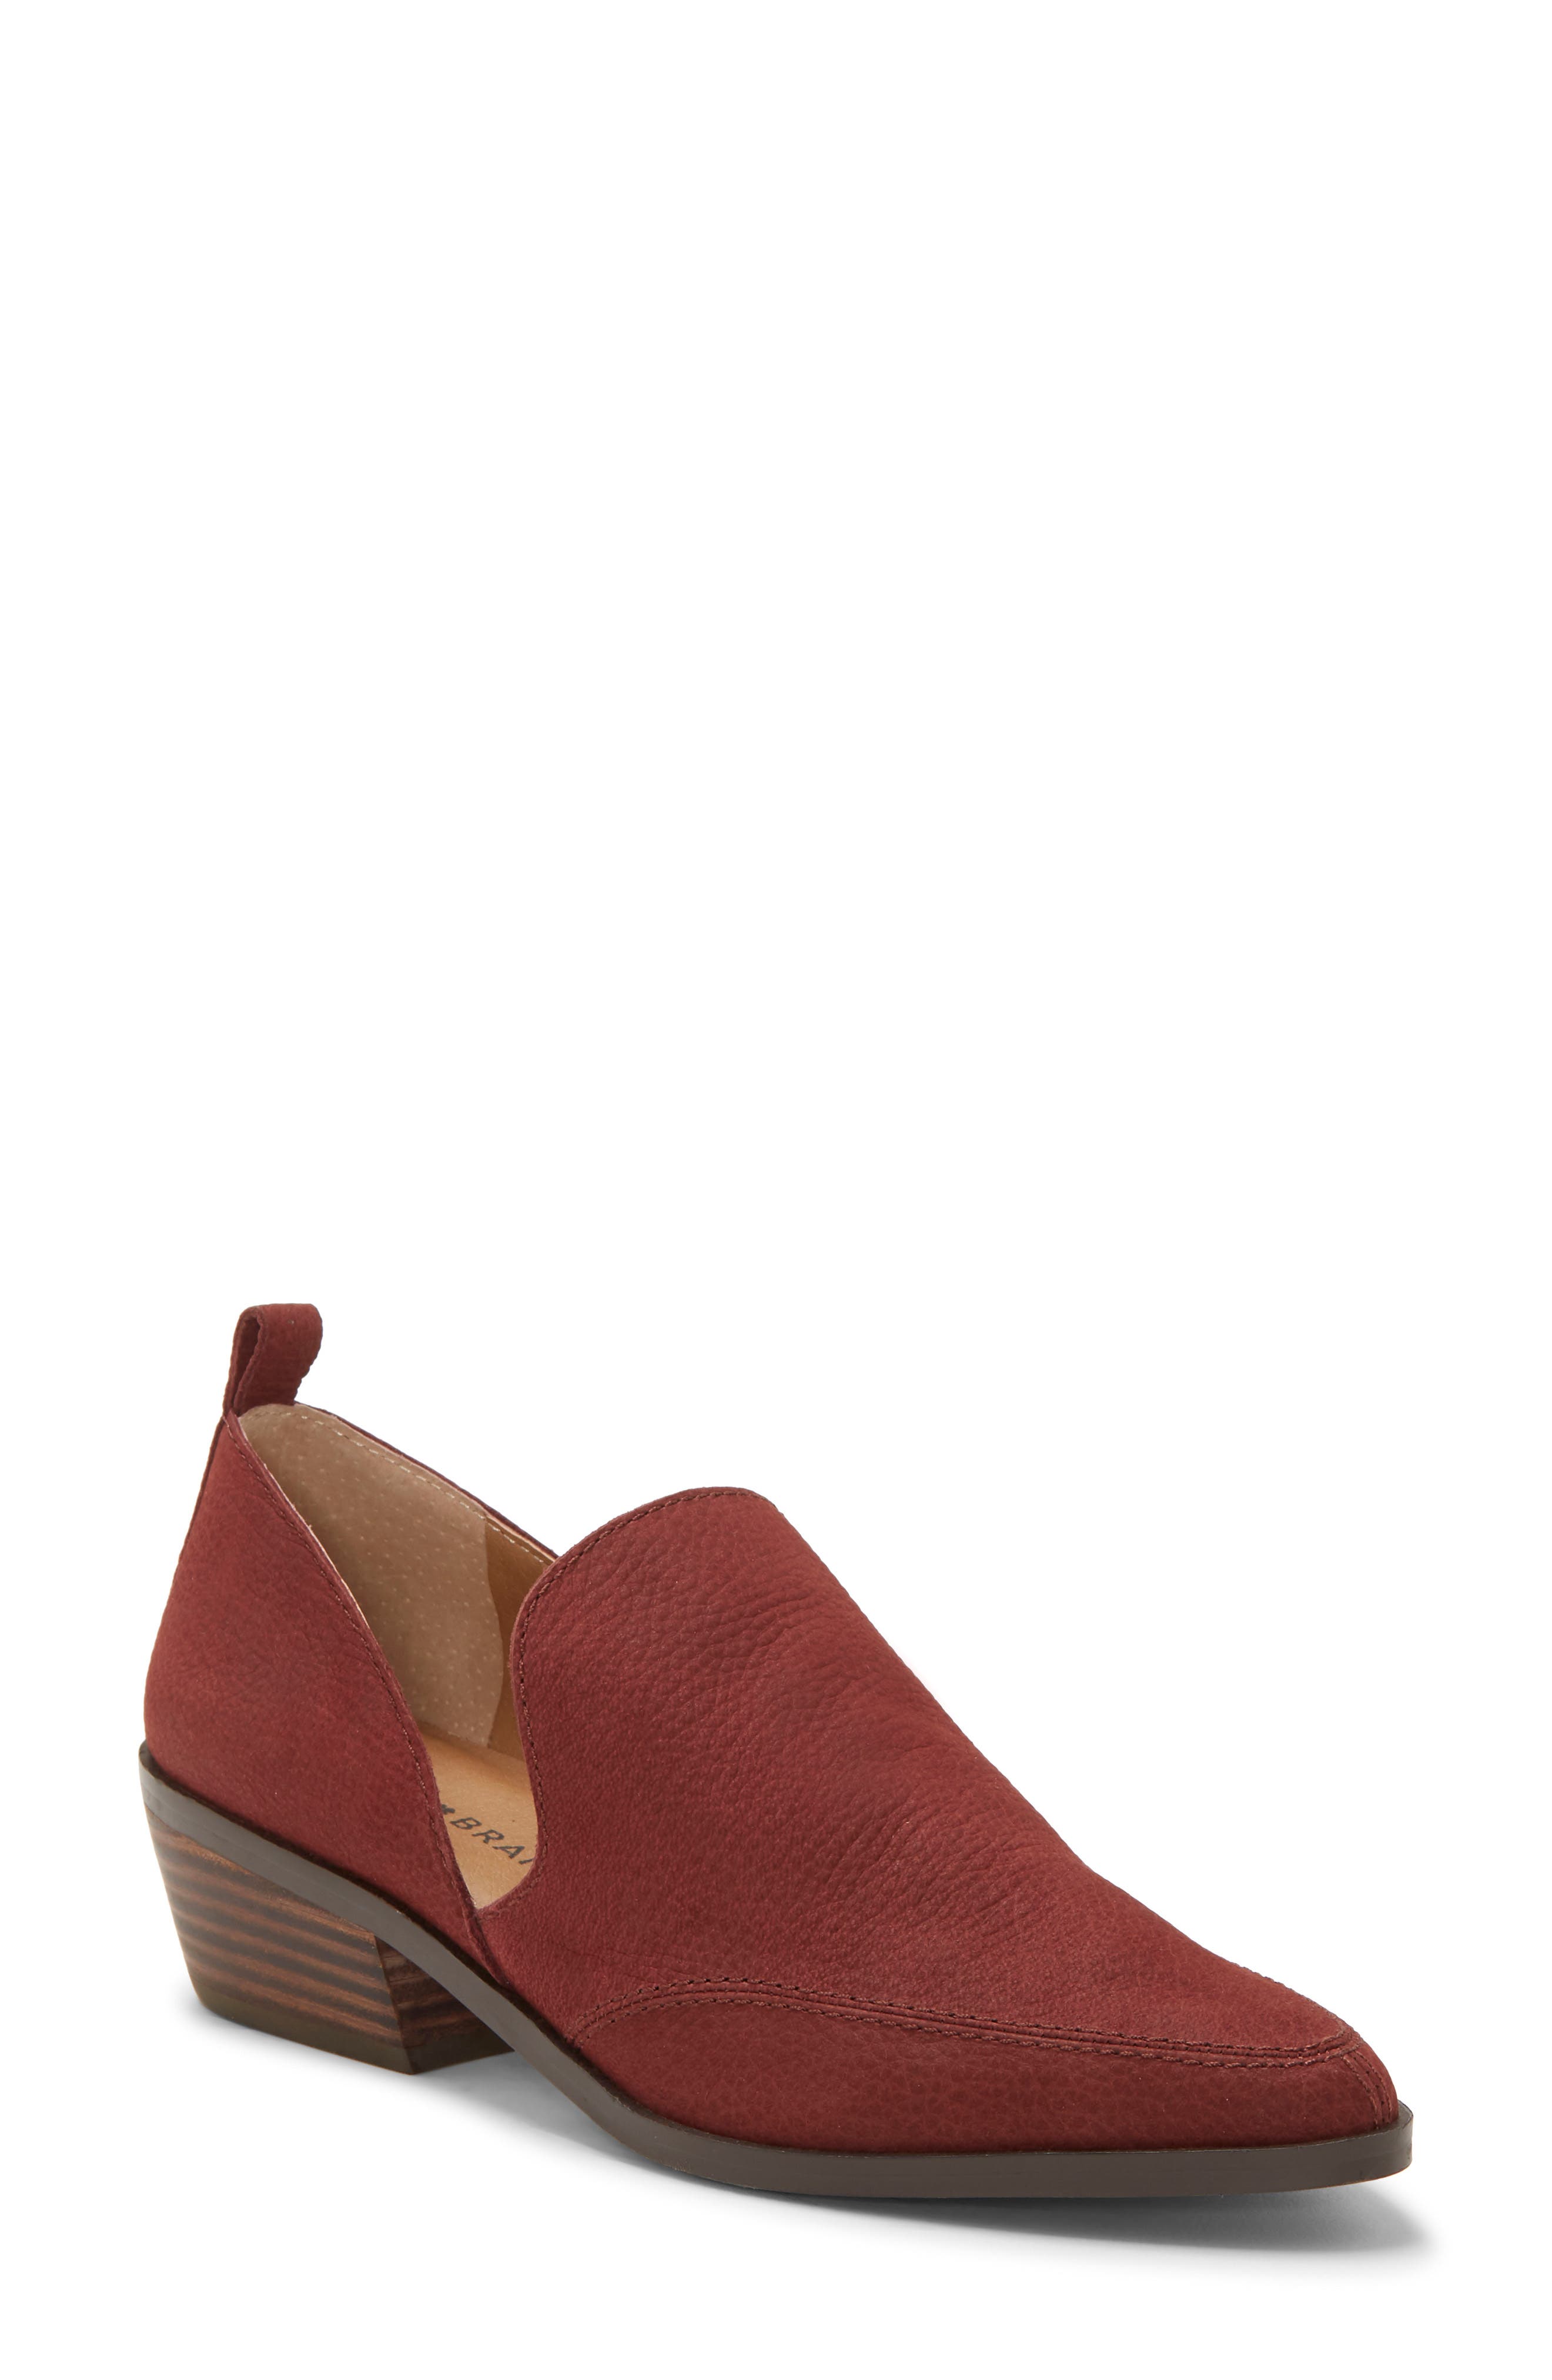 UPC 191644545719 product image for Women's Lucky Brand Mahzan Bootie, Size 11 M - Red | upcitemdb.com